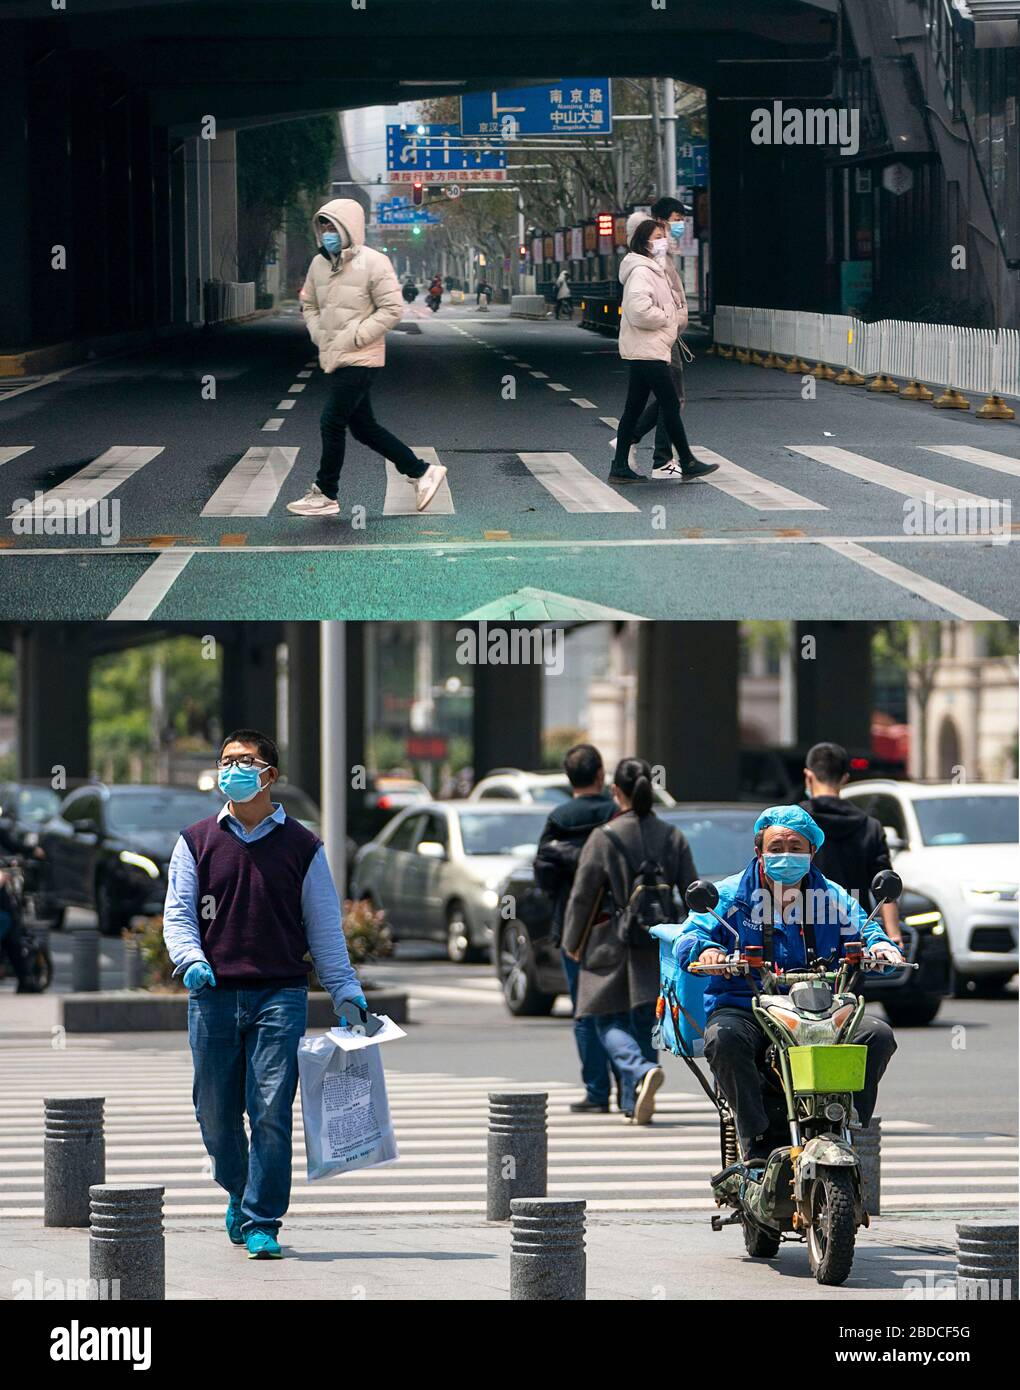 (200408) -- WUHAN, April 8, 2020 (Xinhua) -- Combo photo shows pedestrains crossing the road at a street in Hankou District of Wuhan, central China's Hubei Province on Jan. 26, 2020 (upper) and on April 8, 2020.  With long lines of cars streaming through expressway tollgates and masked passengers boarding trains, the megacity of Wuhan in central China lifted outbound travel restrictions on Wednesday after almost 11 weeks of lockdown imposed to stem the COVID-19 outbreak (Xinhua/Xiong Qi) Stock Photo